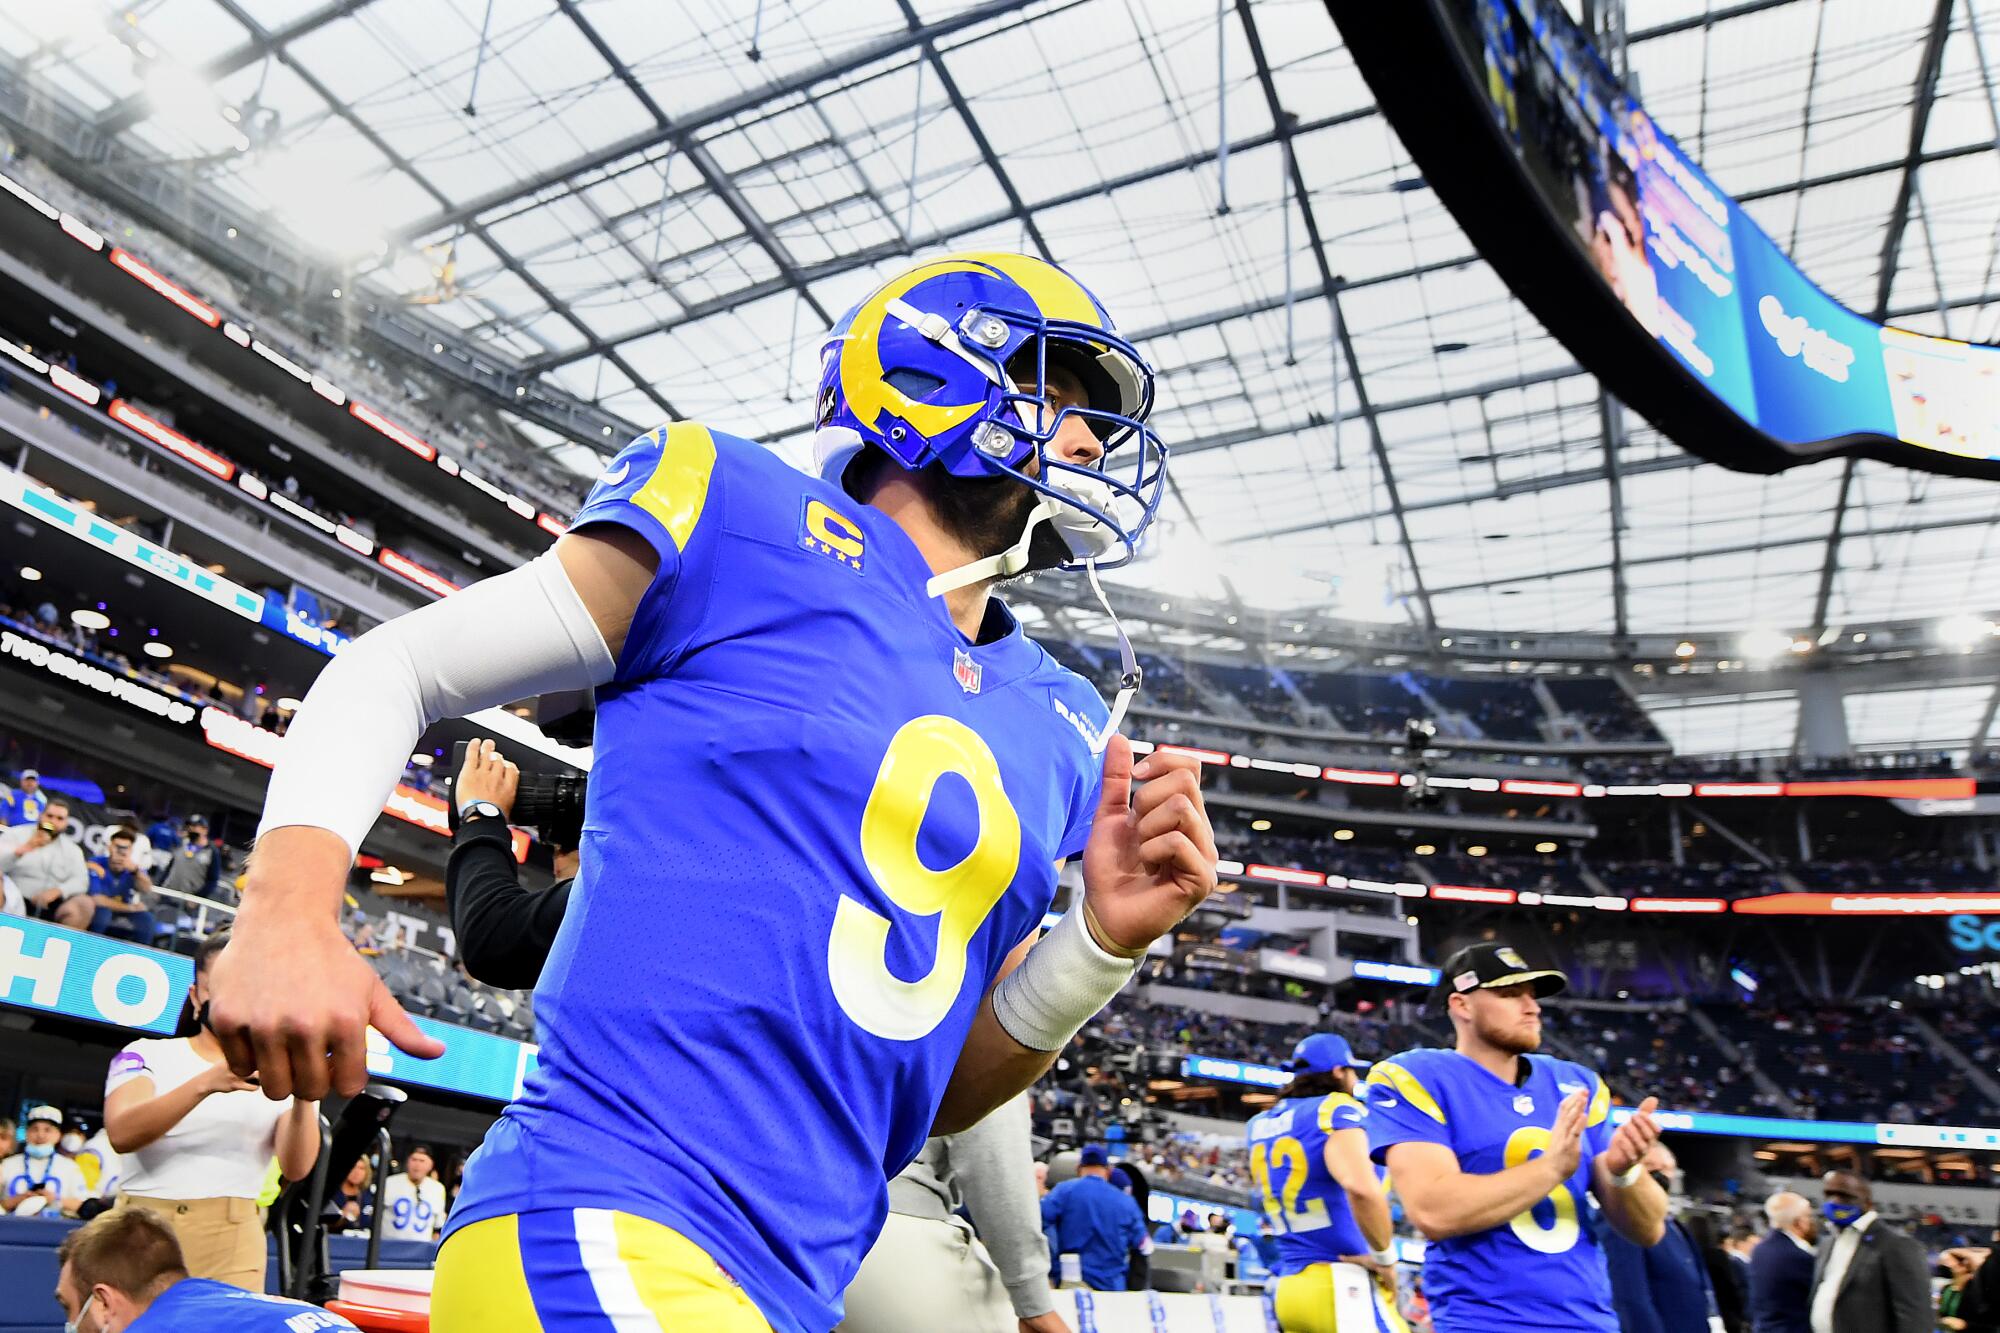 Rams quarterback Matthew Stafford takes the field before a wild-card playoff game.